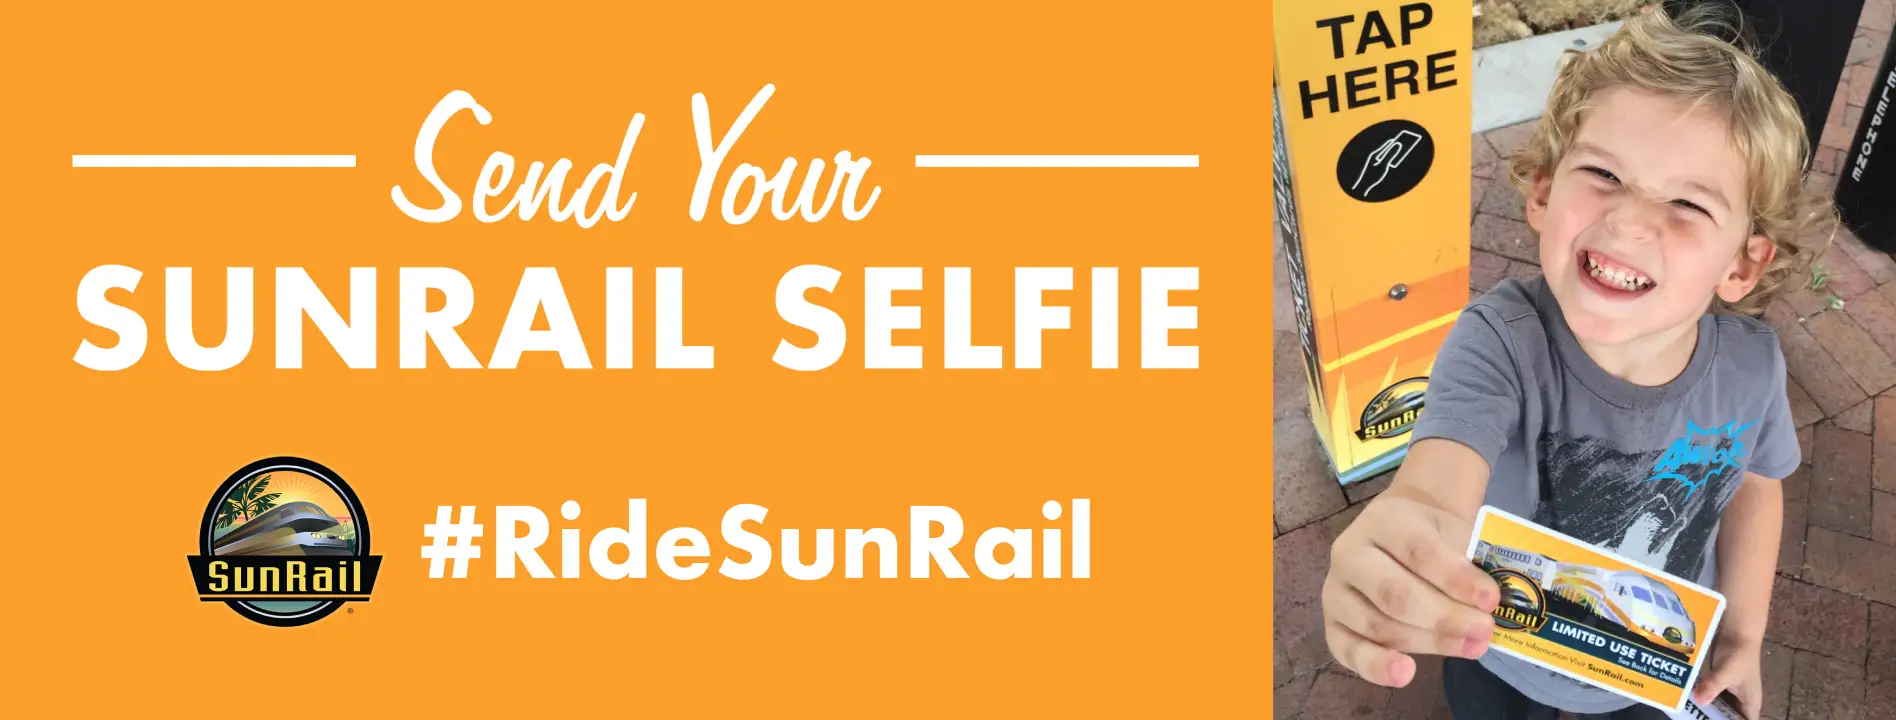 Send Your SunRail Selfie Billboard - Young boy holding a SunRail ticket.